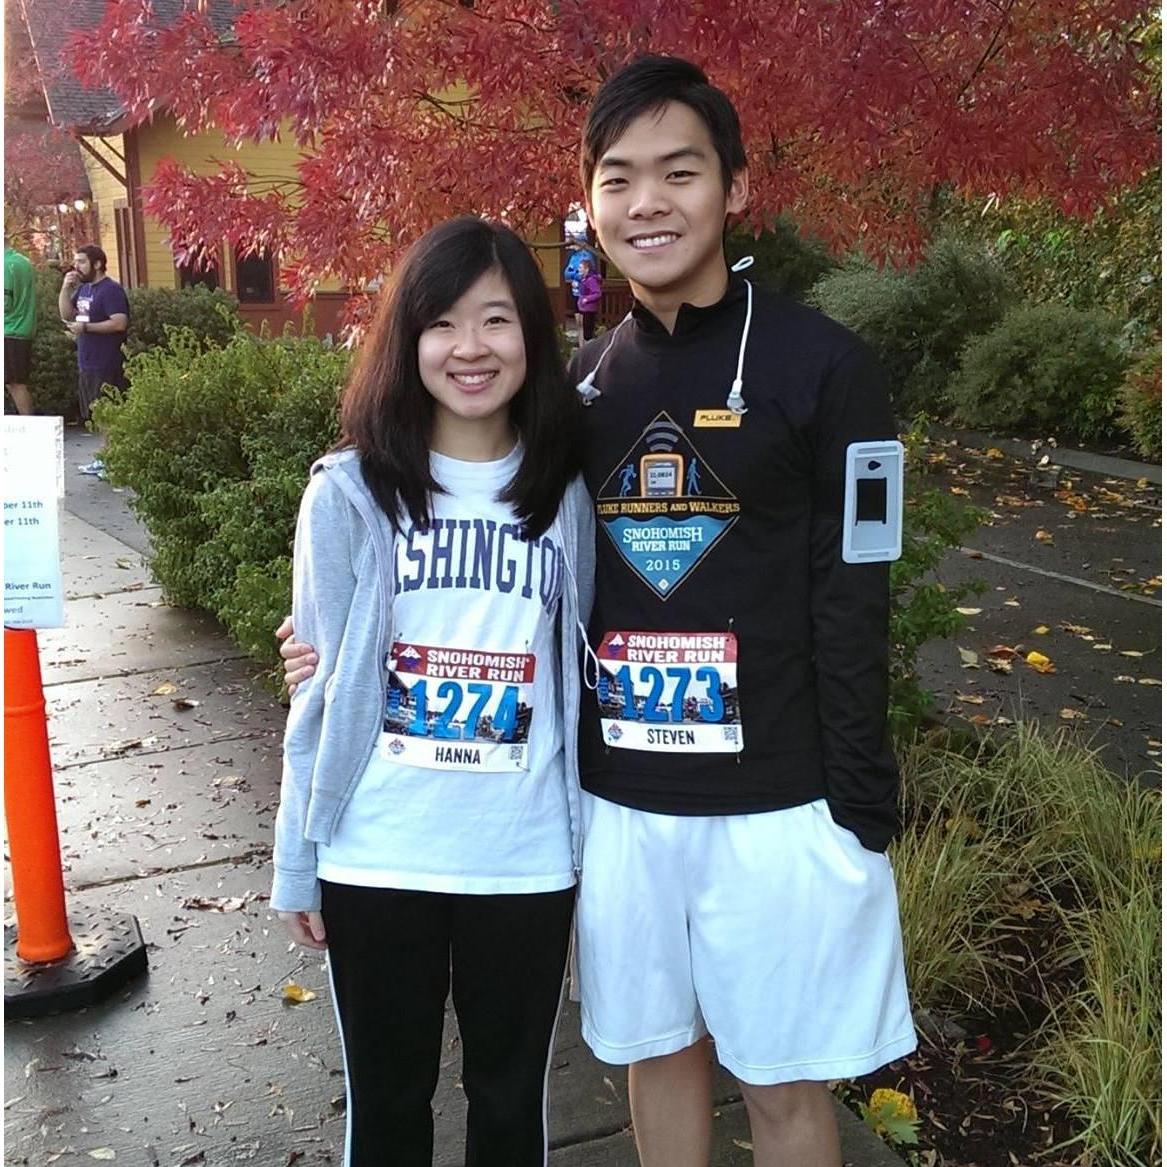 In 2015, we accomplished our first 10K together!